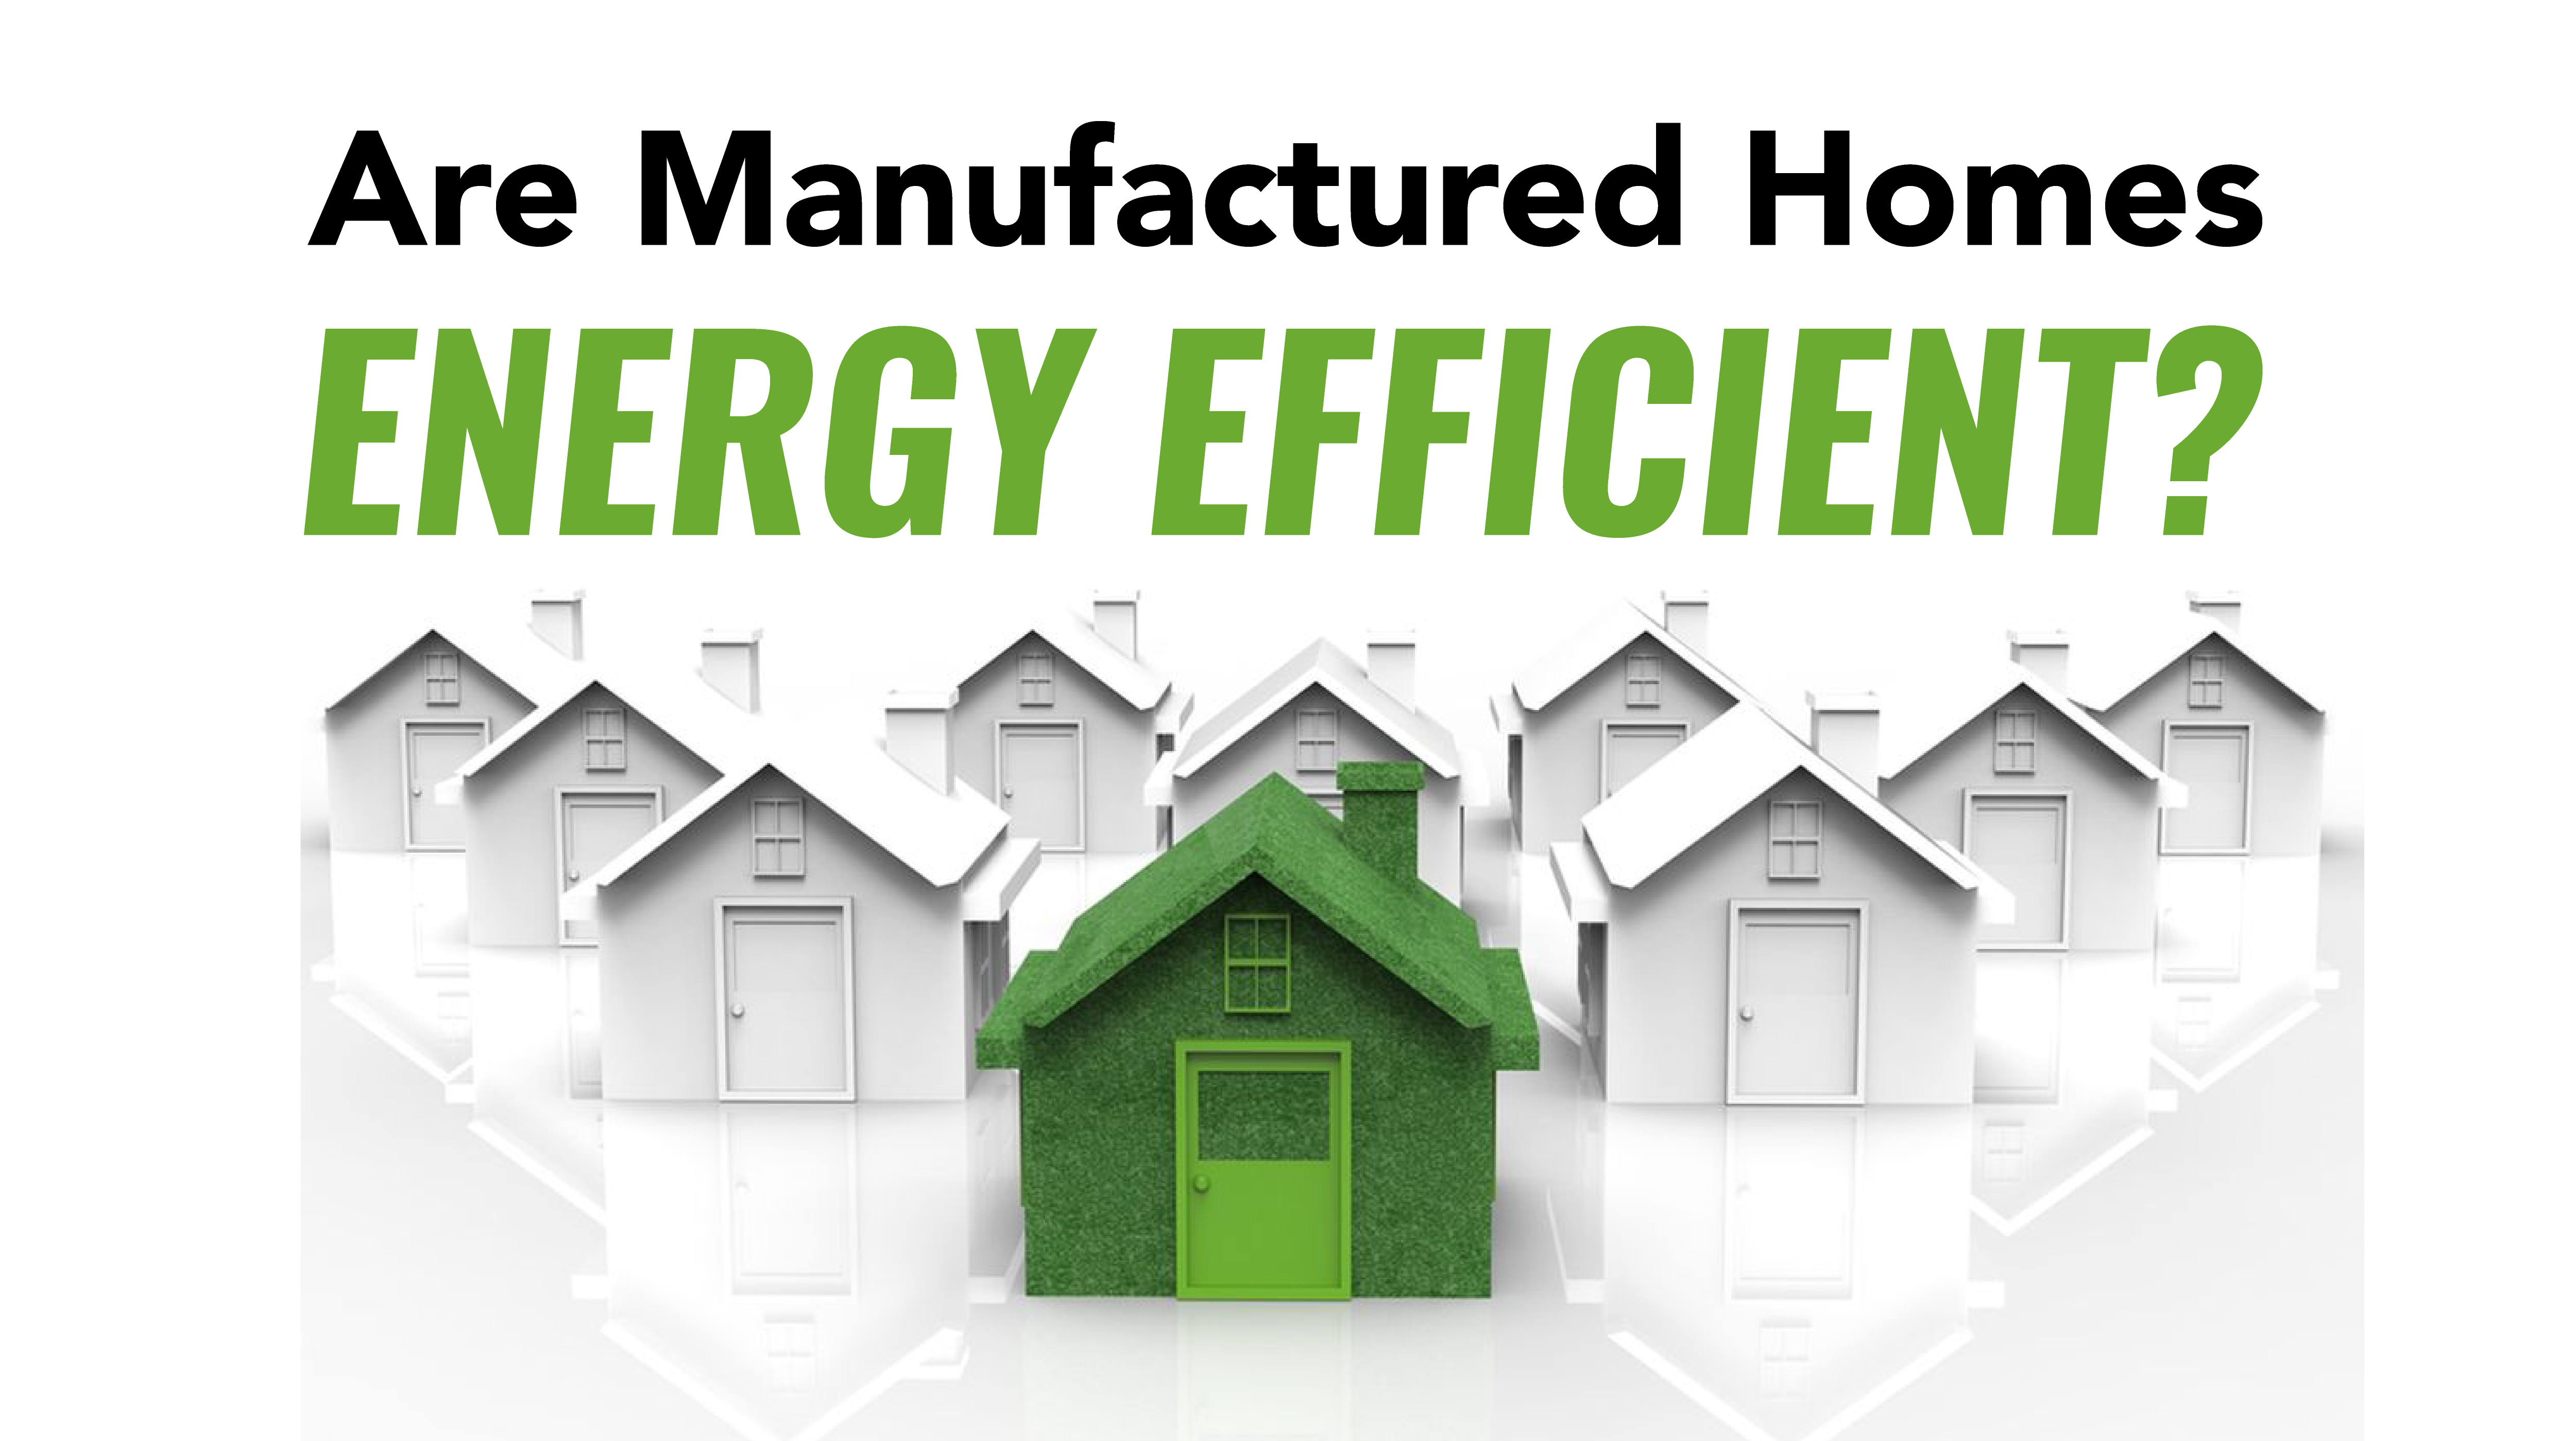 Are Manufactured Homes Energy Efficient?